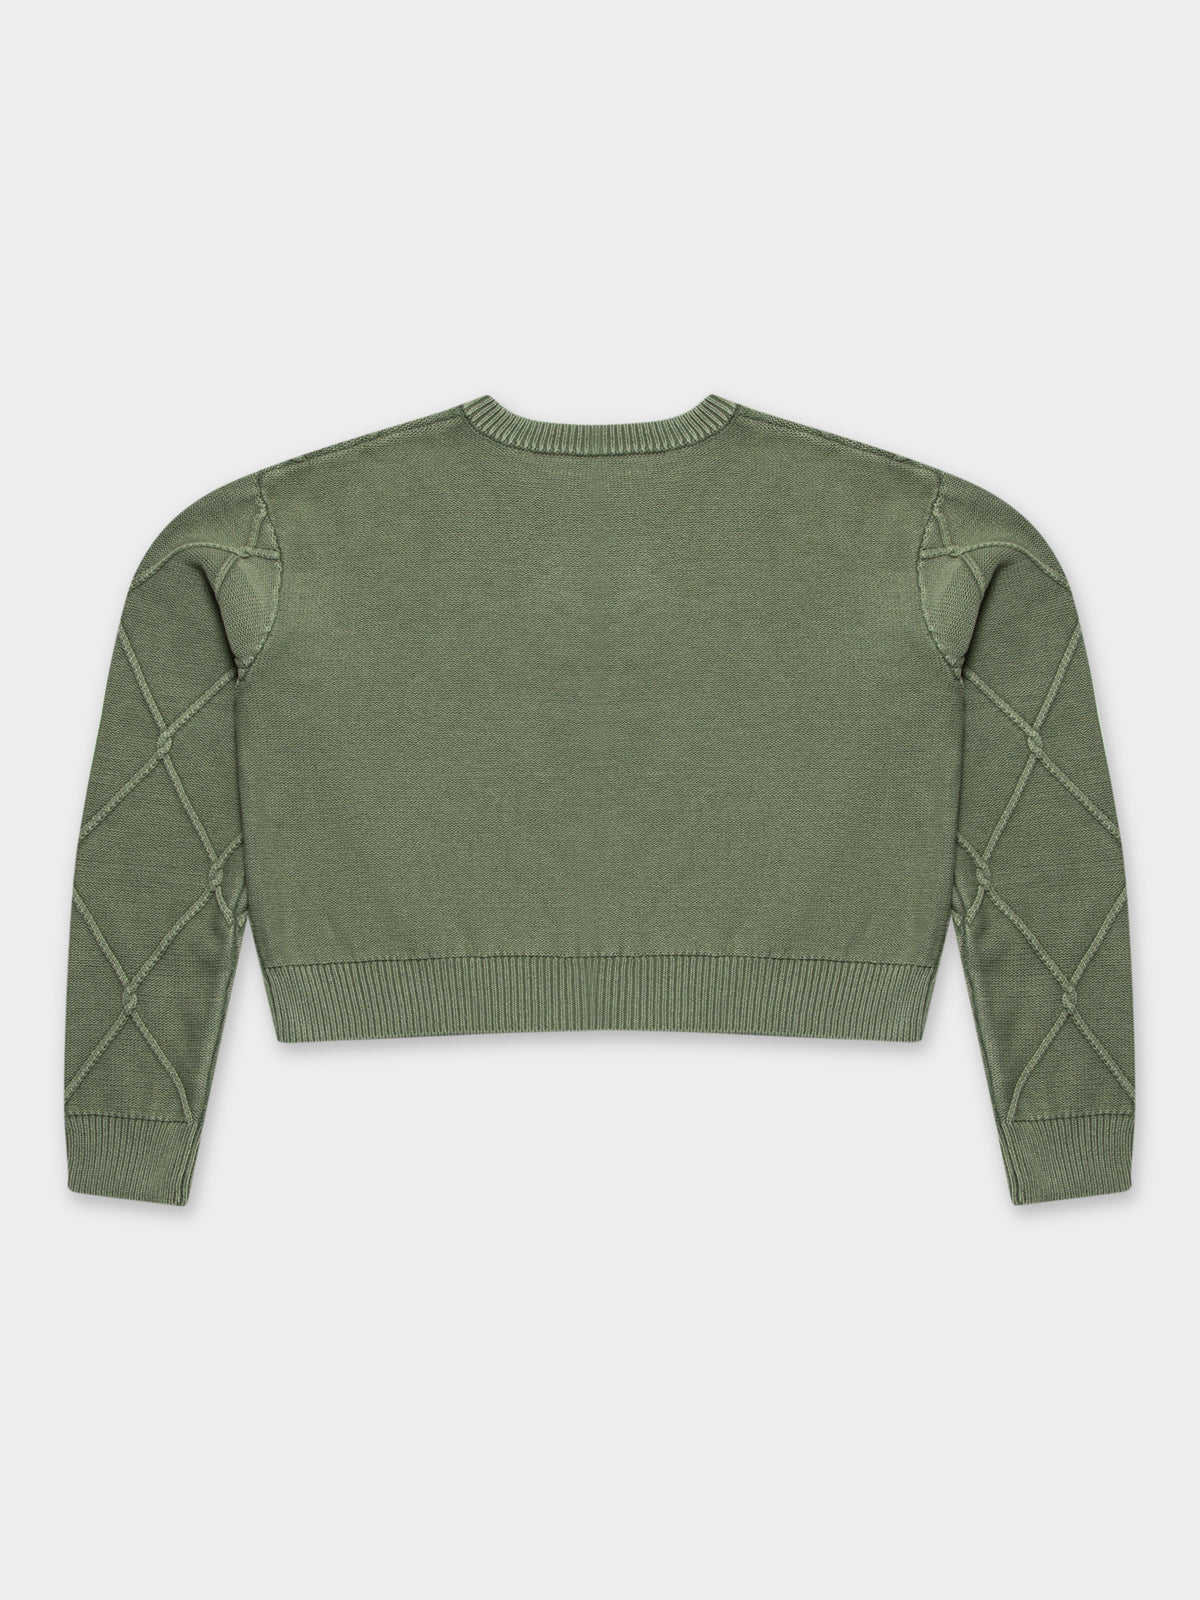 Shanti Acid Cable Knit in Washed Olive